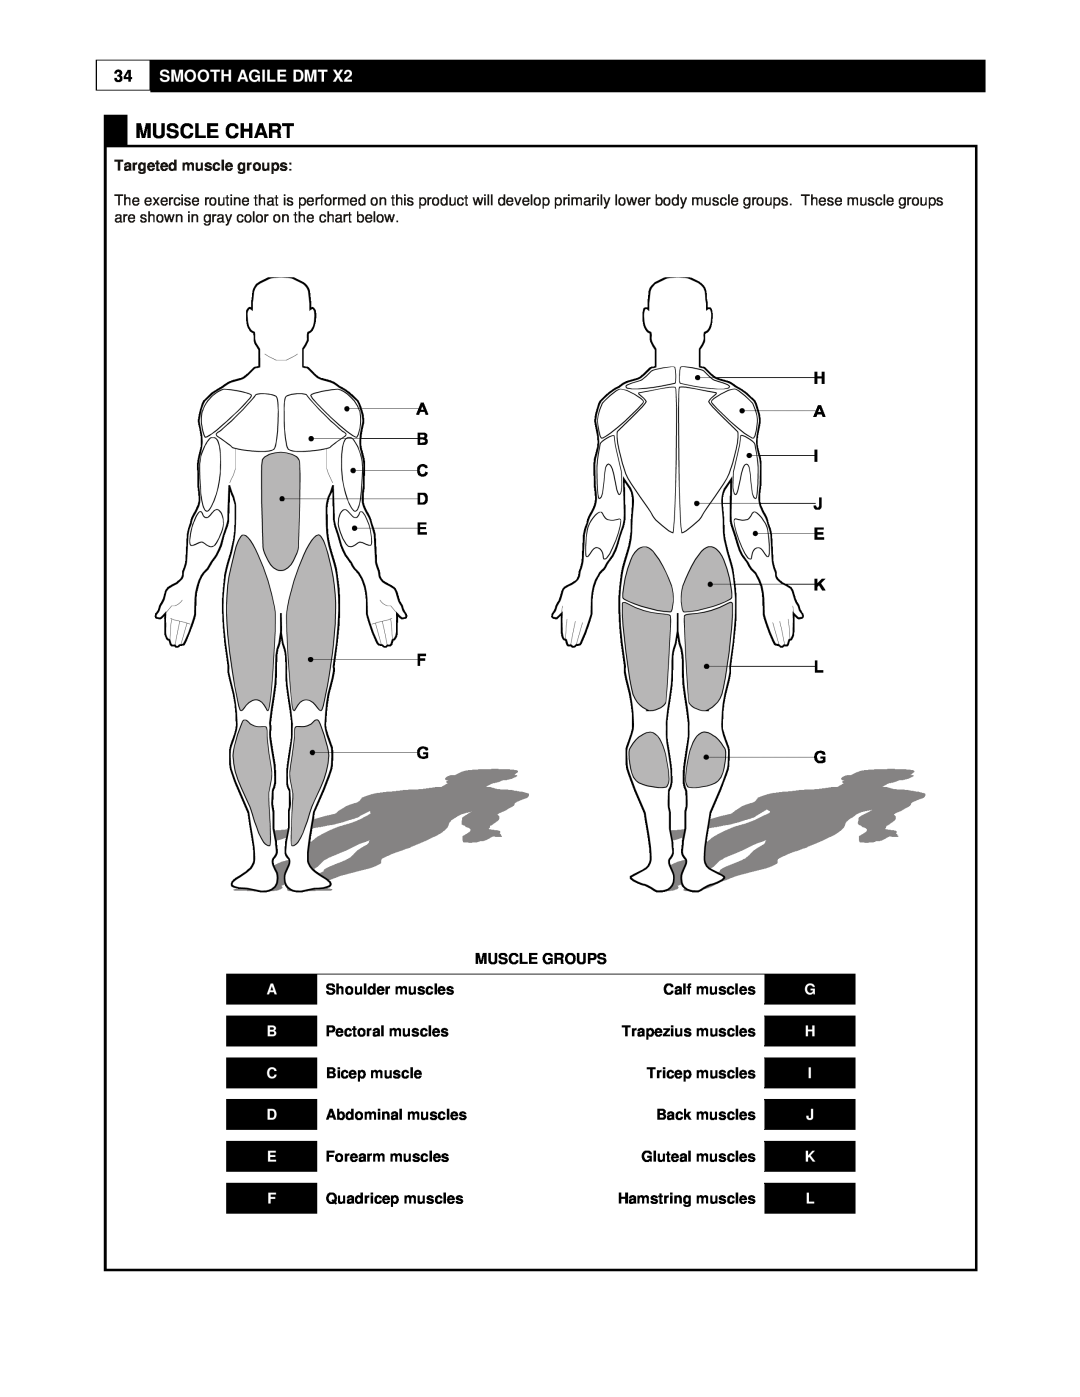 Smooth Fitness DMT X2 user manual Muscle Chart, Smooth Agile Dmt, Targeted muscle groups, A B C D E F, G H I J K L 